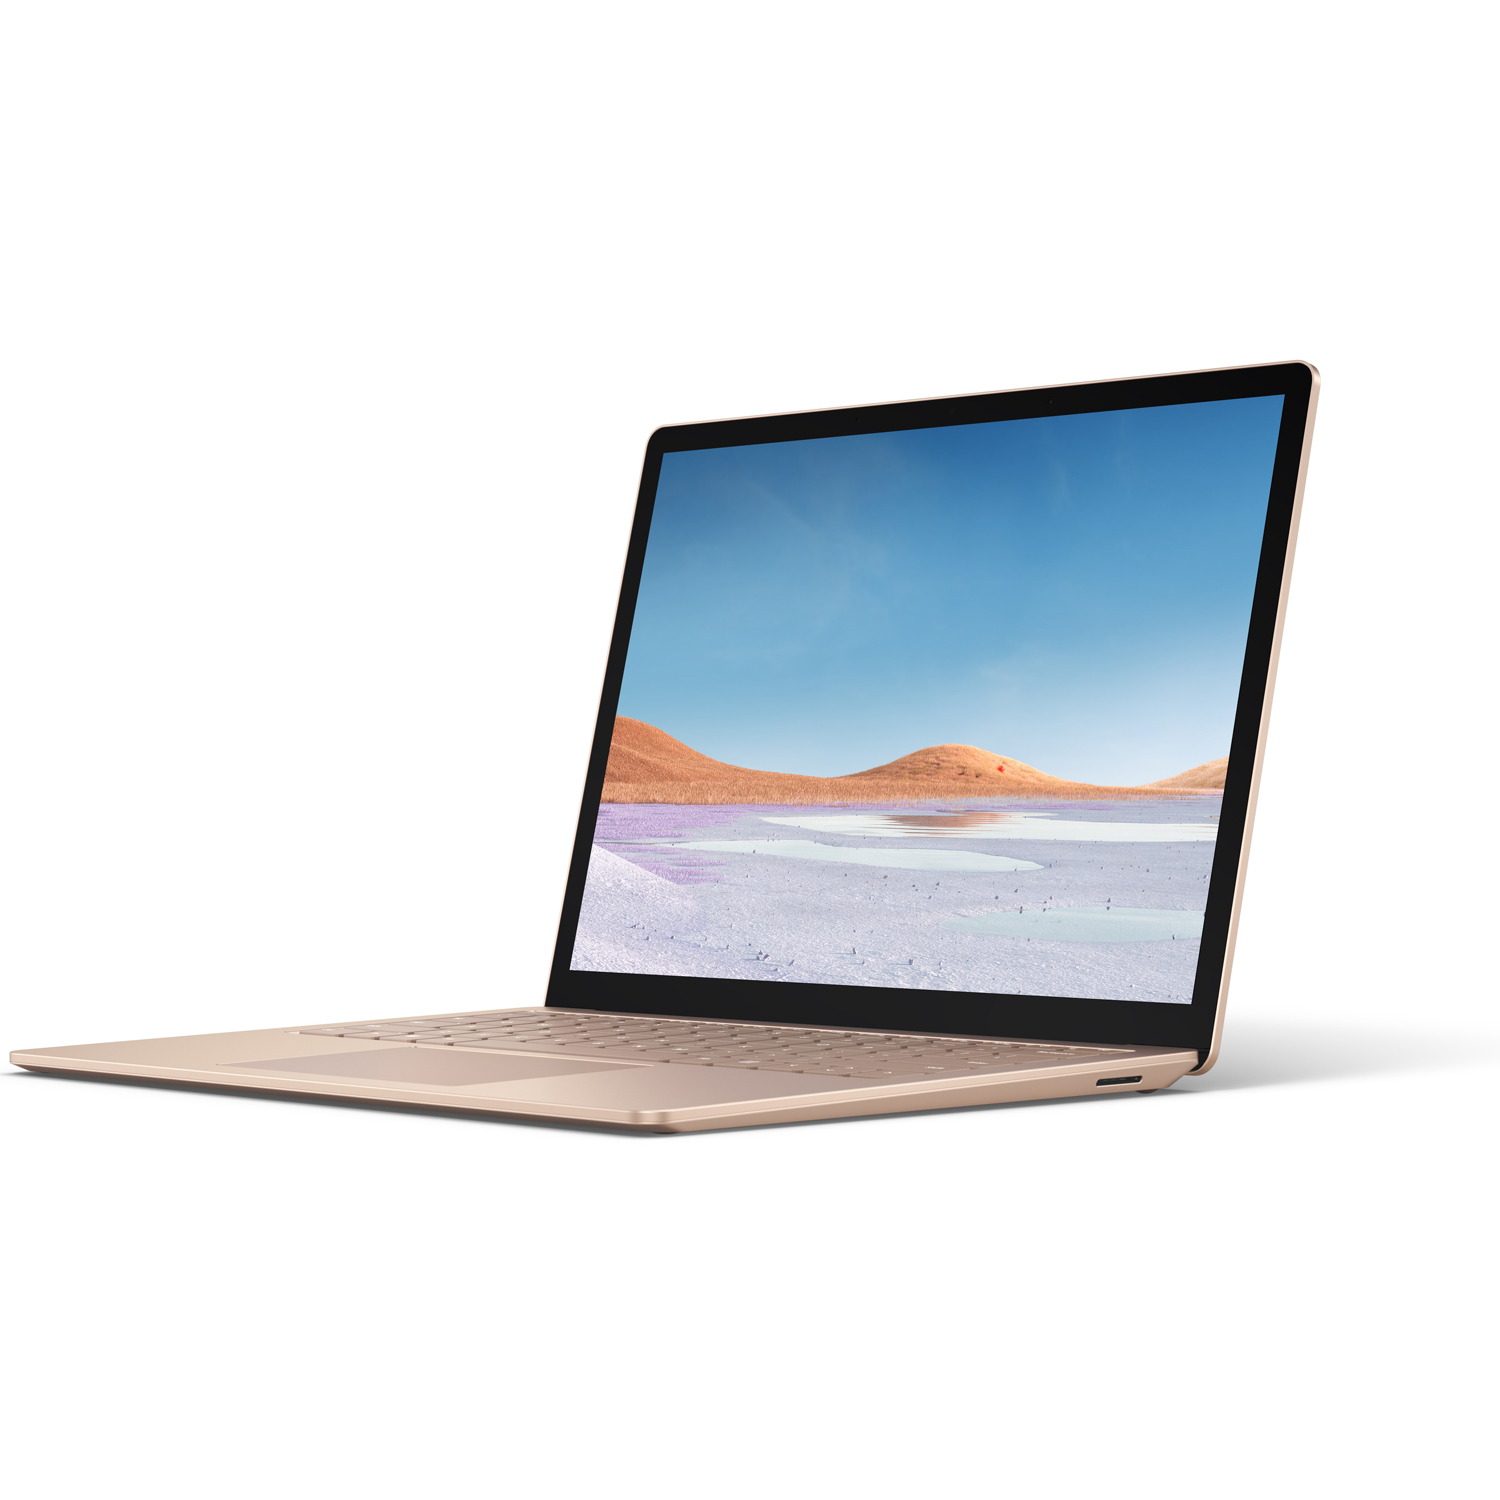 Microsoft VEF-00064 Surface Laptop 3  13.5 Touch-Screen  Intel Core i7  16GB Memory - 256GB Solid State Drive, Sandstone